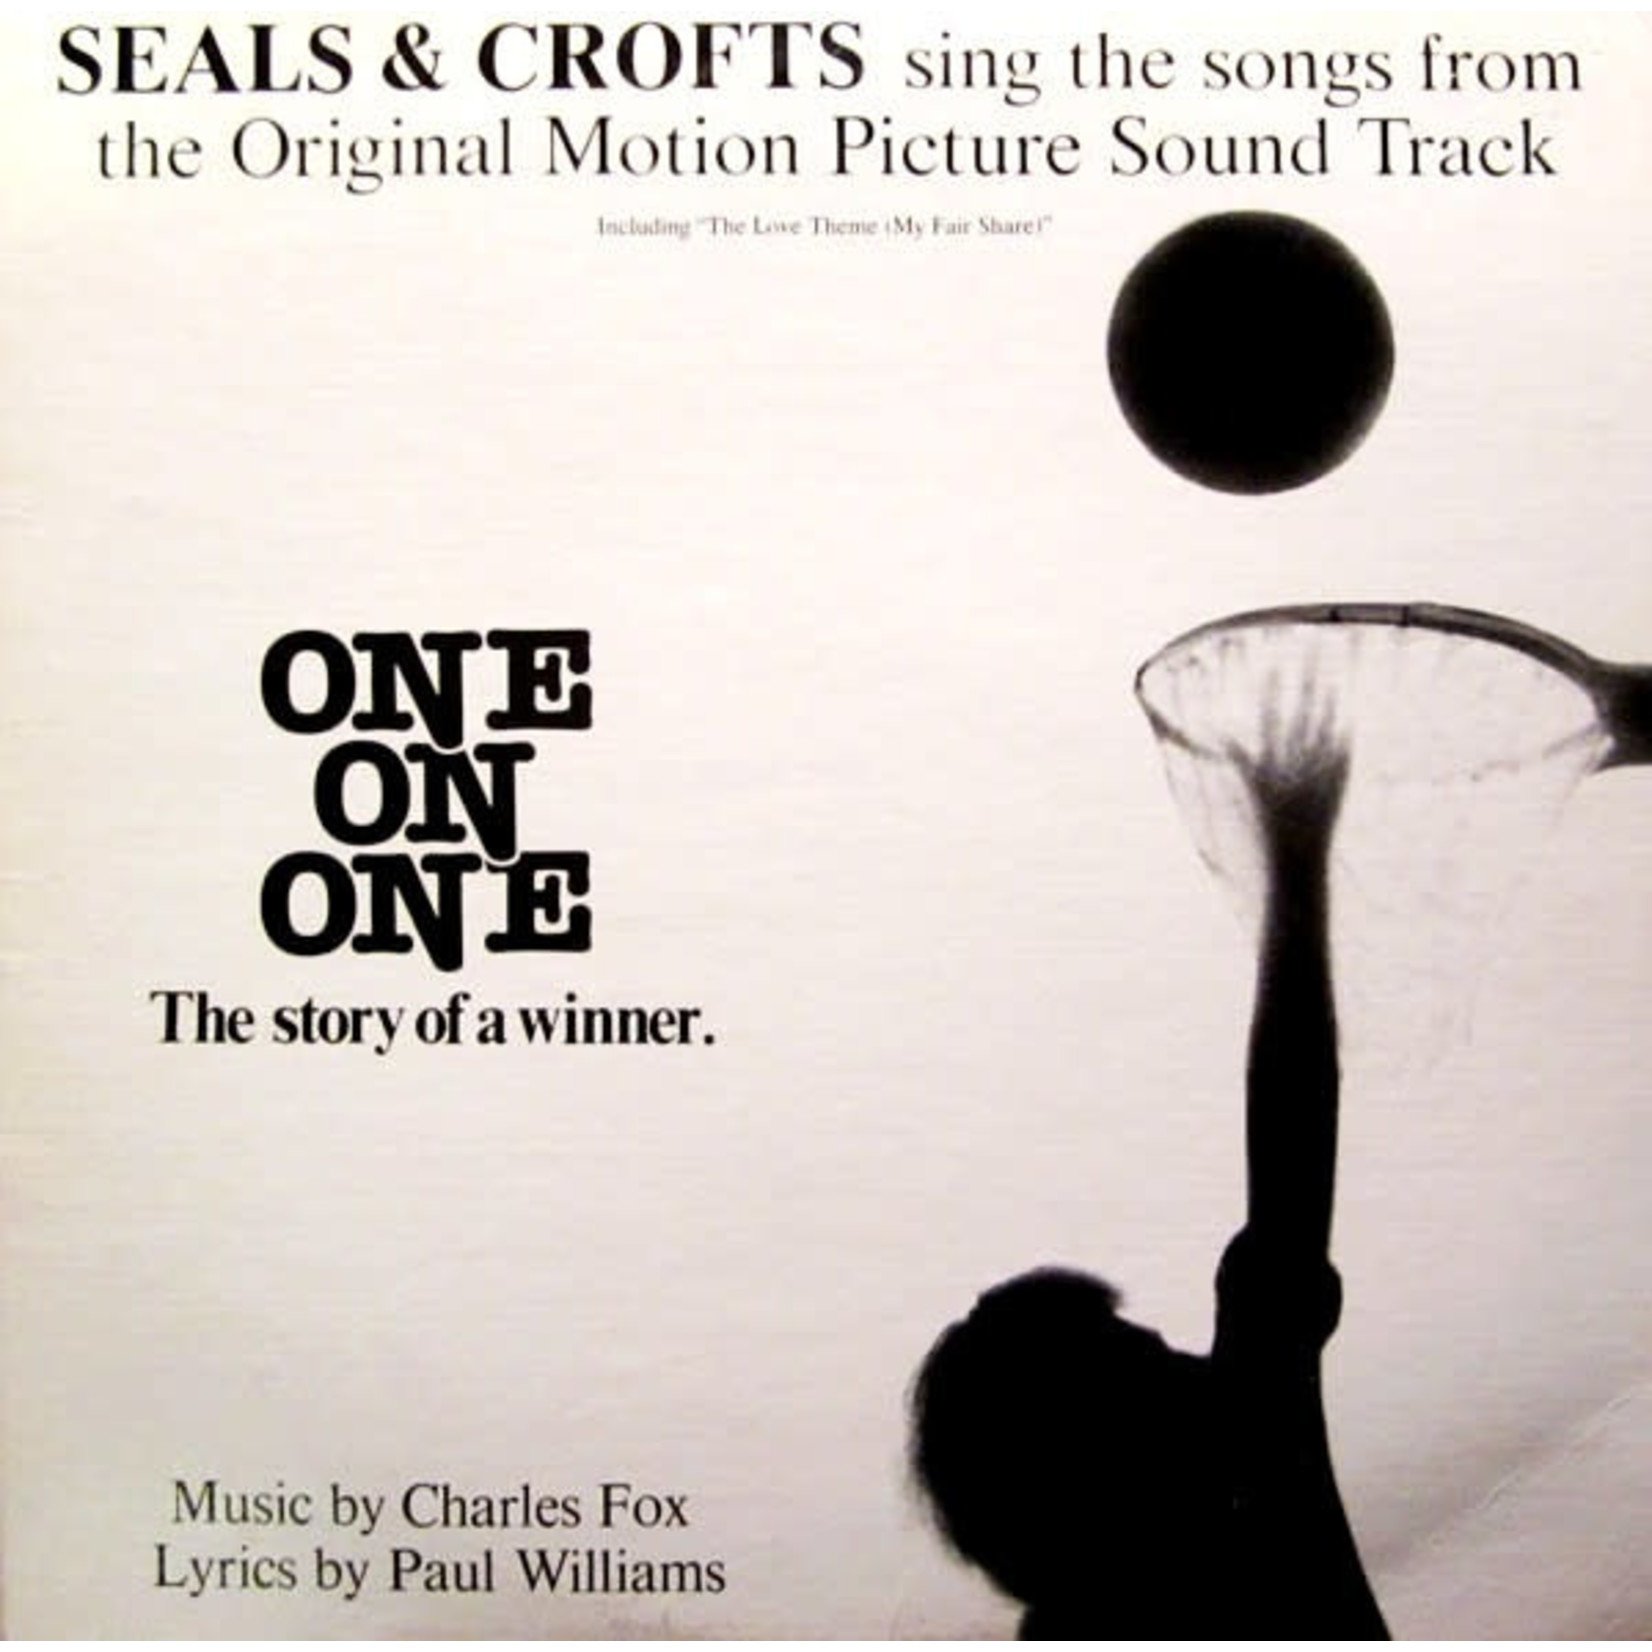 Seals & Crofts Seals & Crofts – Original Motion Picture Sound Track "One On One" (LP, BS 3076, VG)